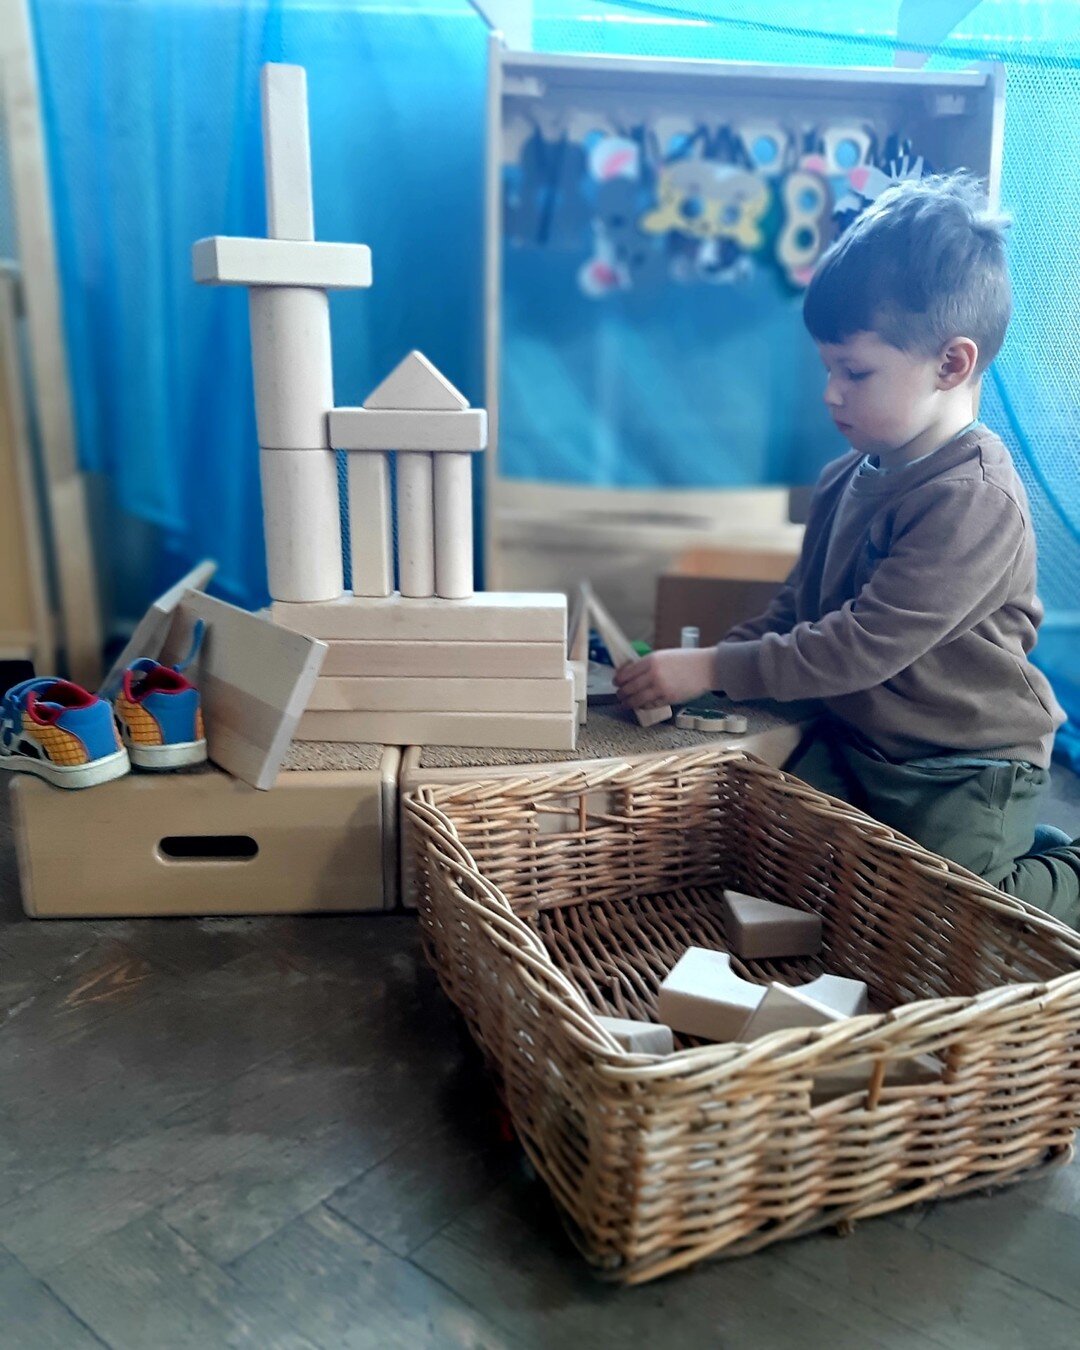 Their minds were not built to sit and be taught. They were built to explore, play and learn.

Wow what a fabulous creation! 🤩

#exploration #creativity #buildingblocks #smallworldplay #freedomtobuild #expression #kidslovenature #learningthroughplay 